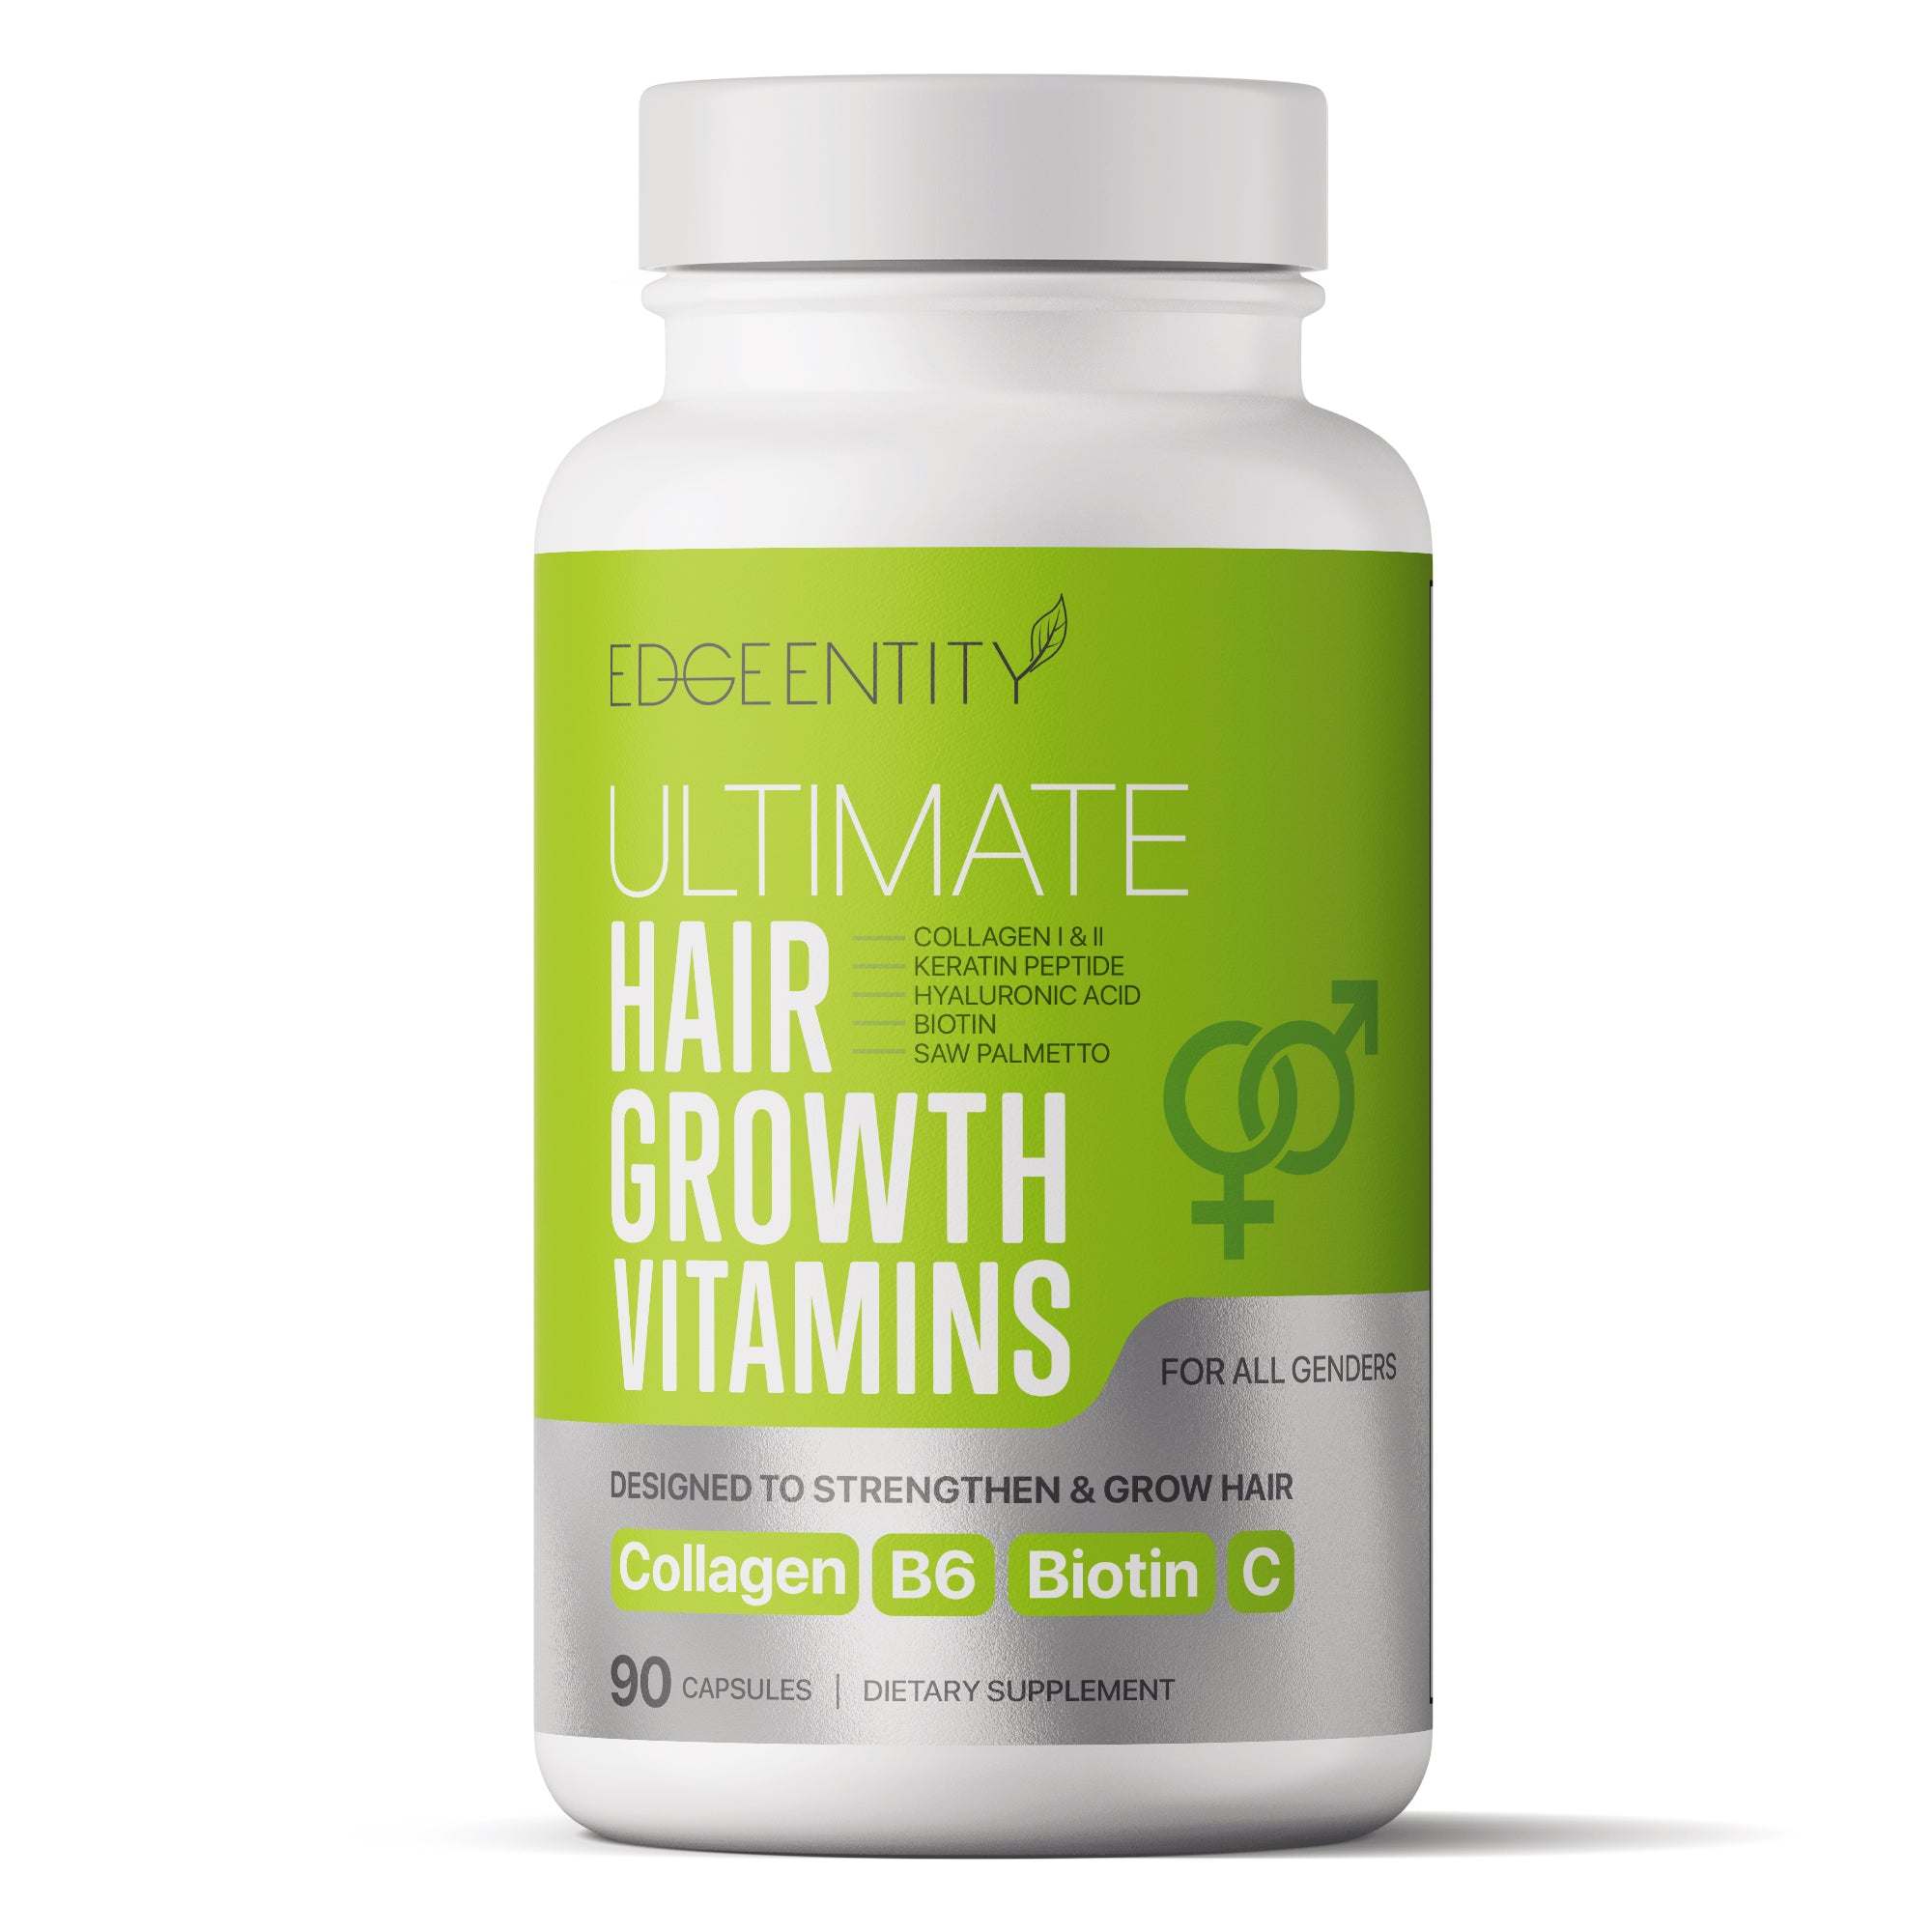 ULTIMATE Hair Growth Supplements